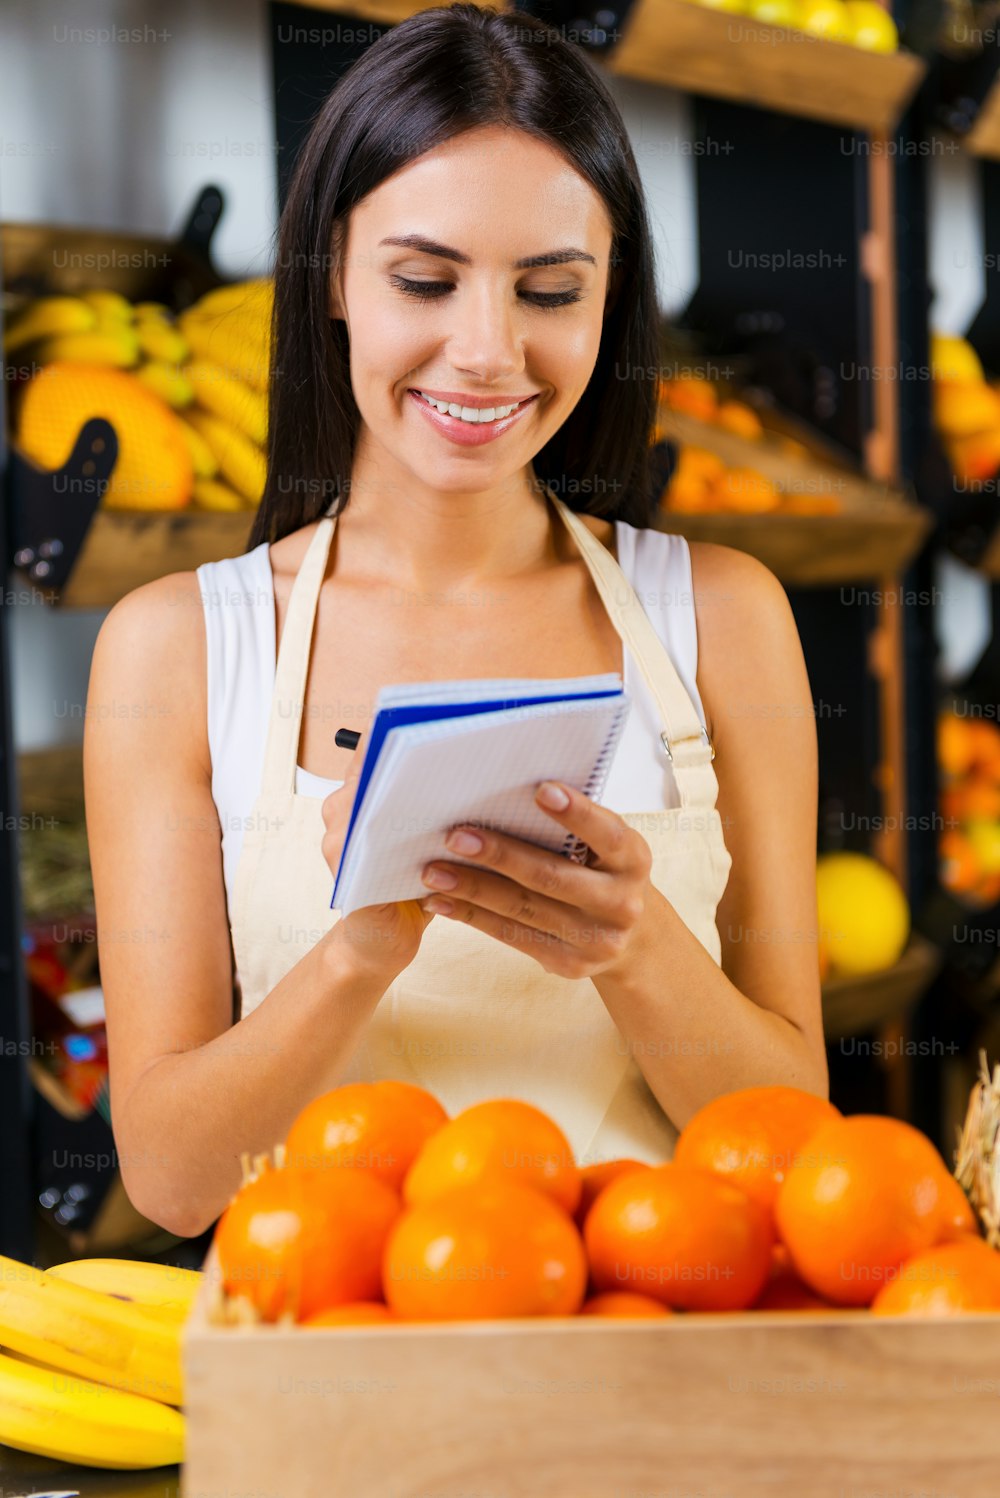 Beautiful young woman in apron making notes in note pad and smiling while standing in grocery store with variety of fruits in the background